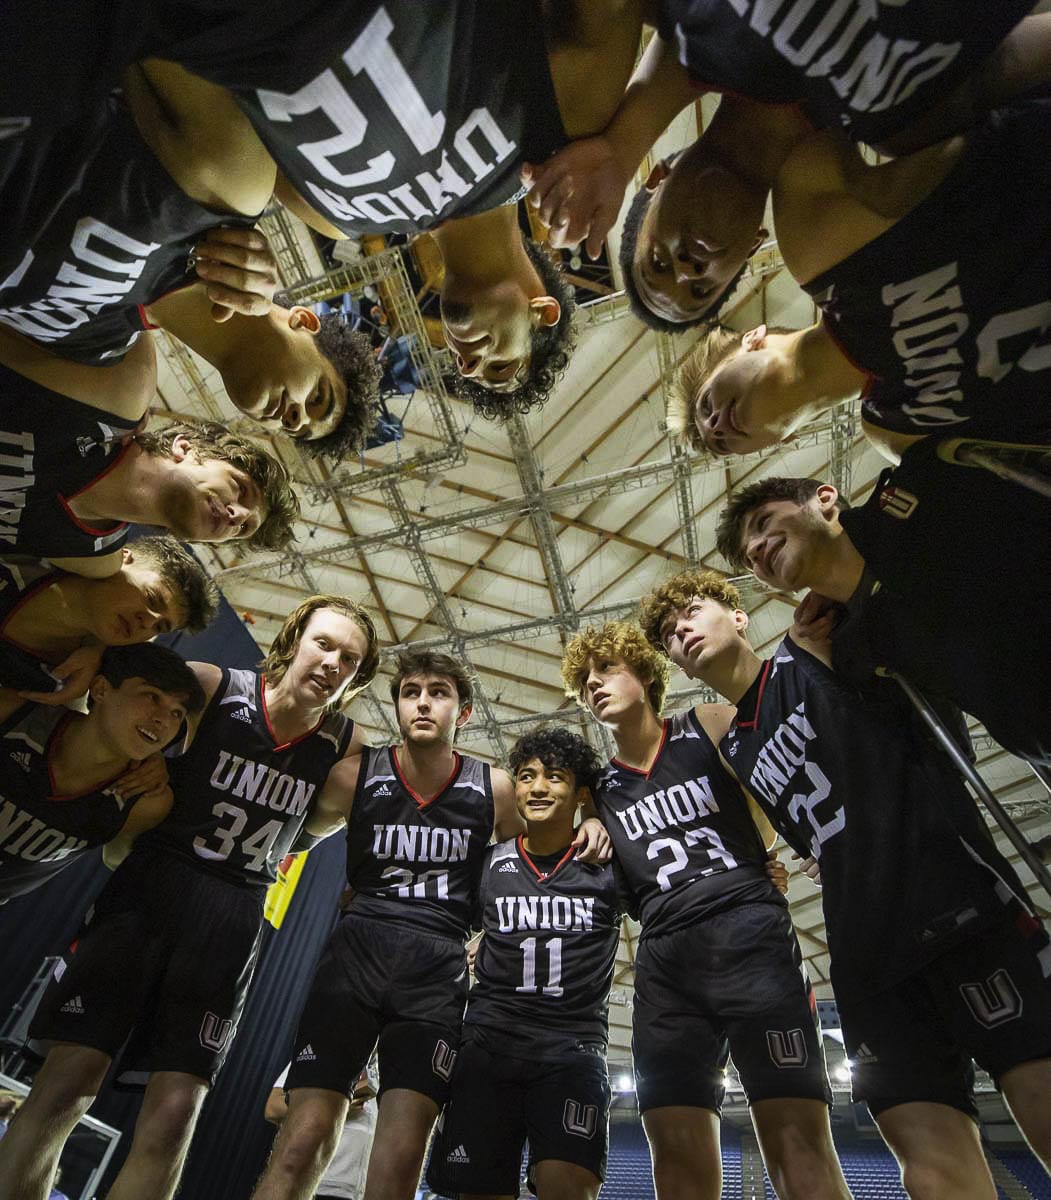 The Union boys basketball team took home the third-place trophy, playing on the final day of the last WIAA-sanctioned postseason of 2020. Photo courtesy Heather Tianen